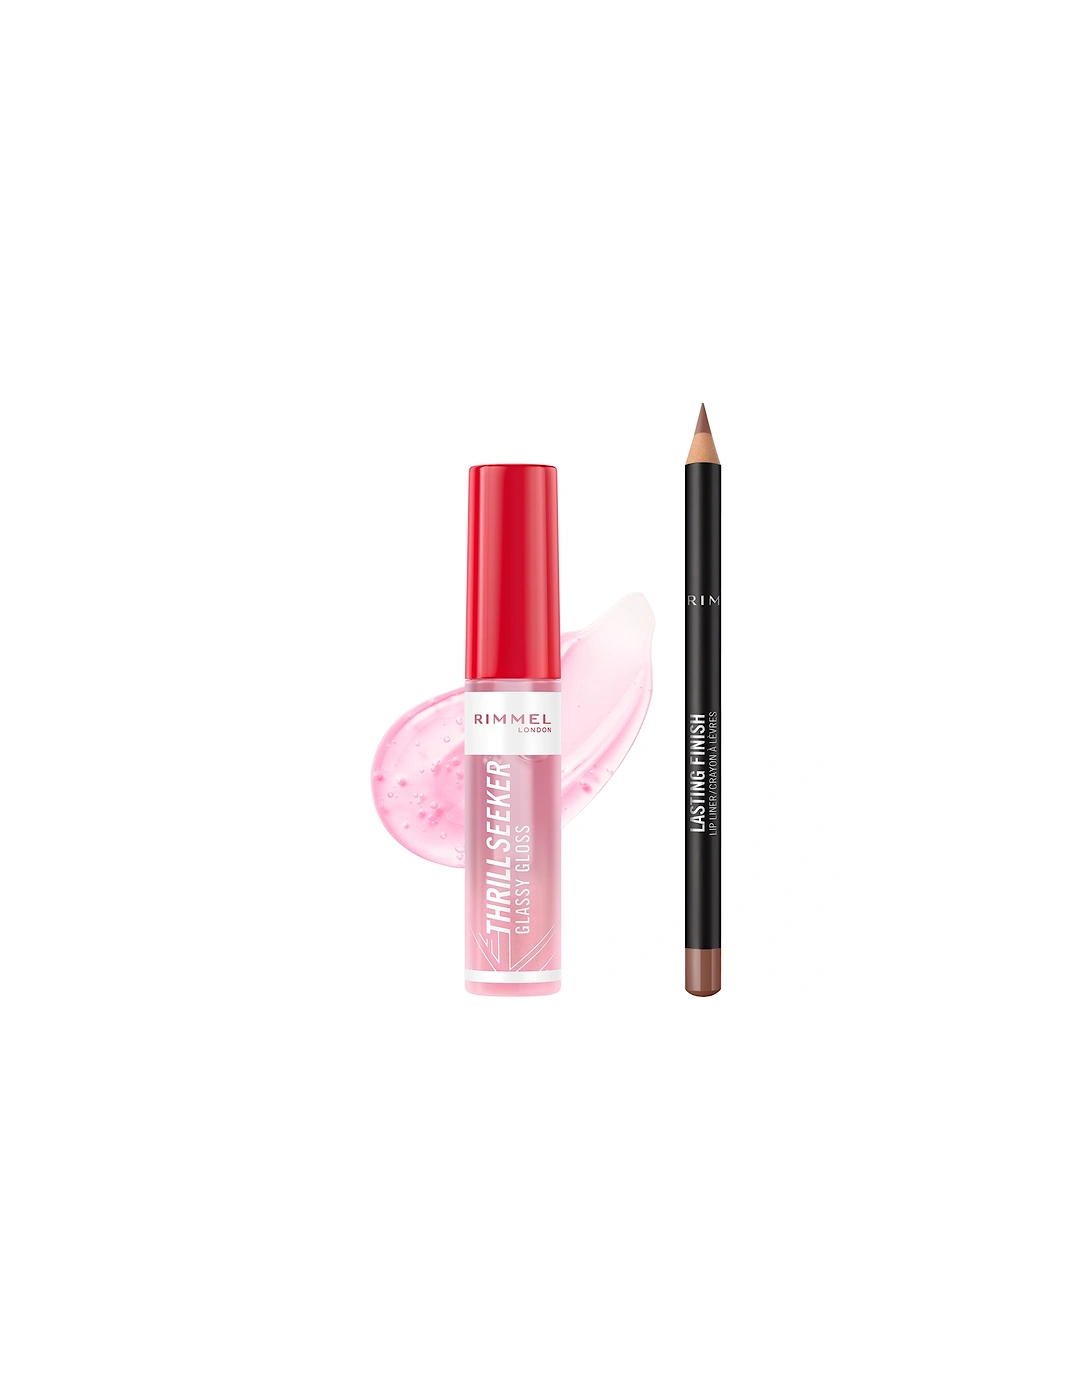 Thrill Seeker Glassy Gloss and Lasting Finish Lip Liner - 100 Coco Suga, 4 of 3